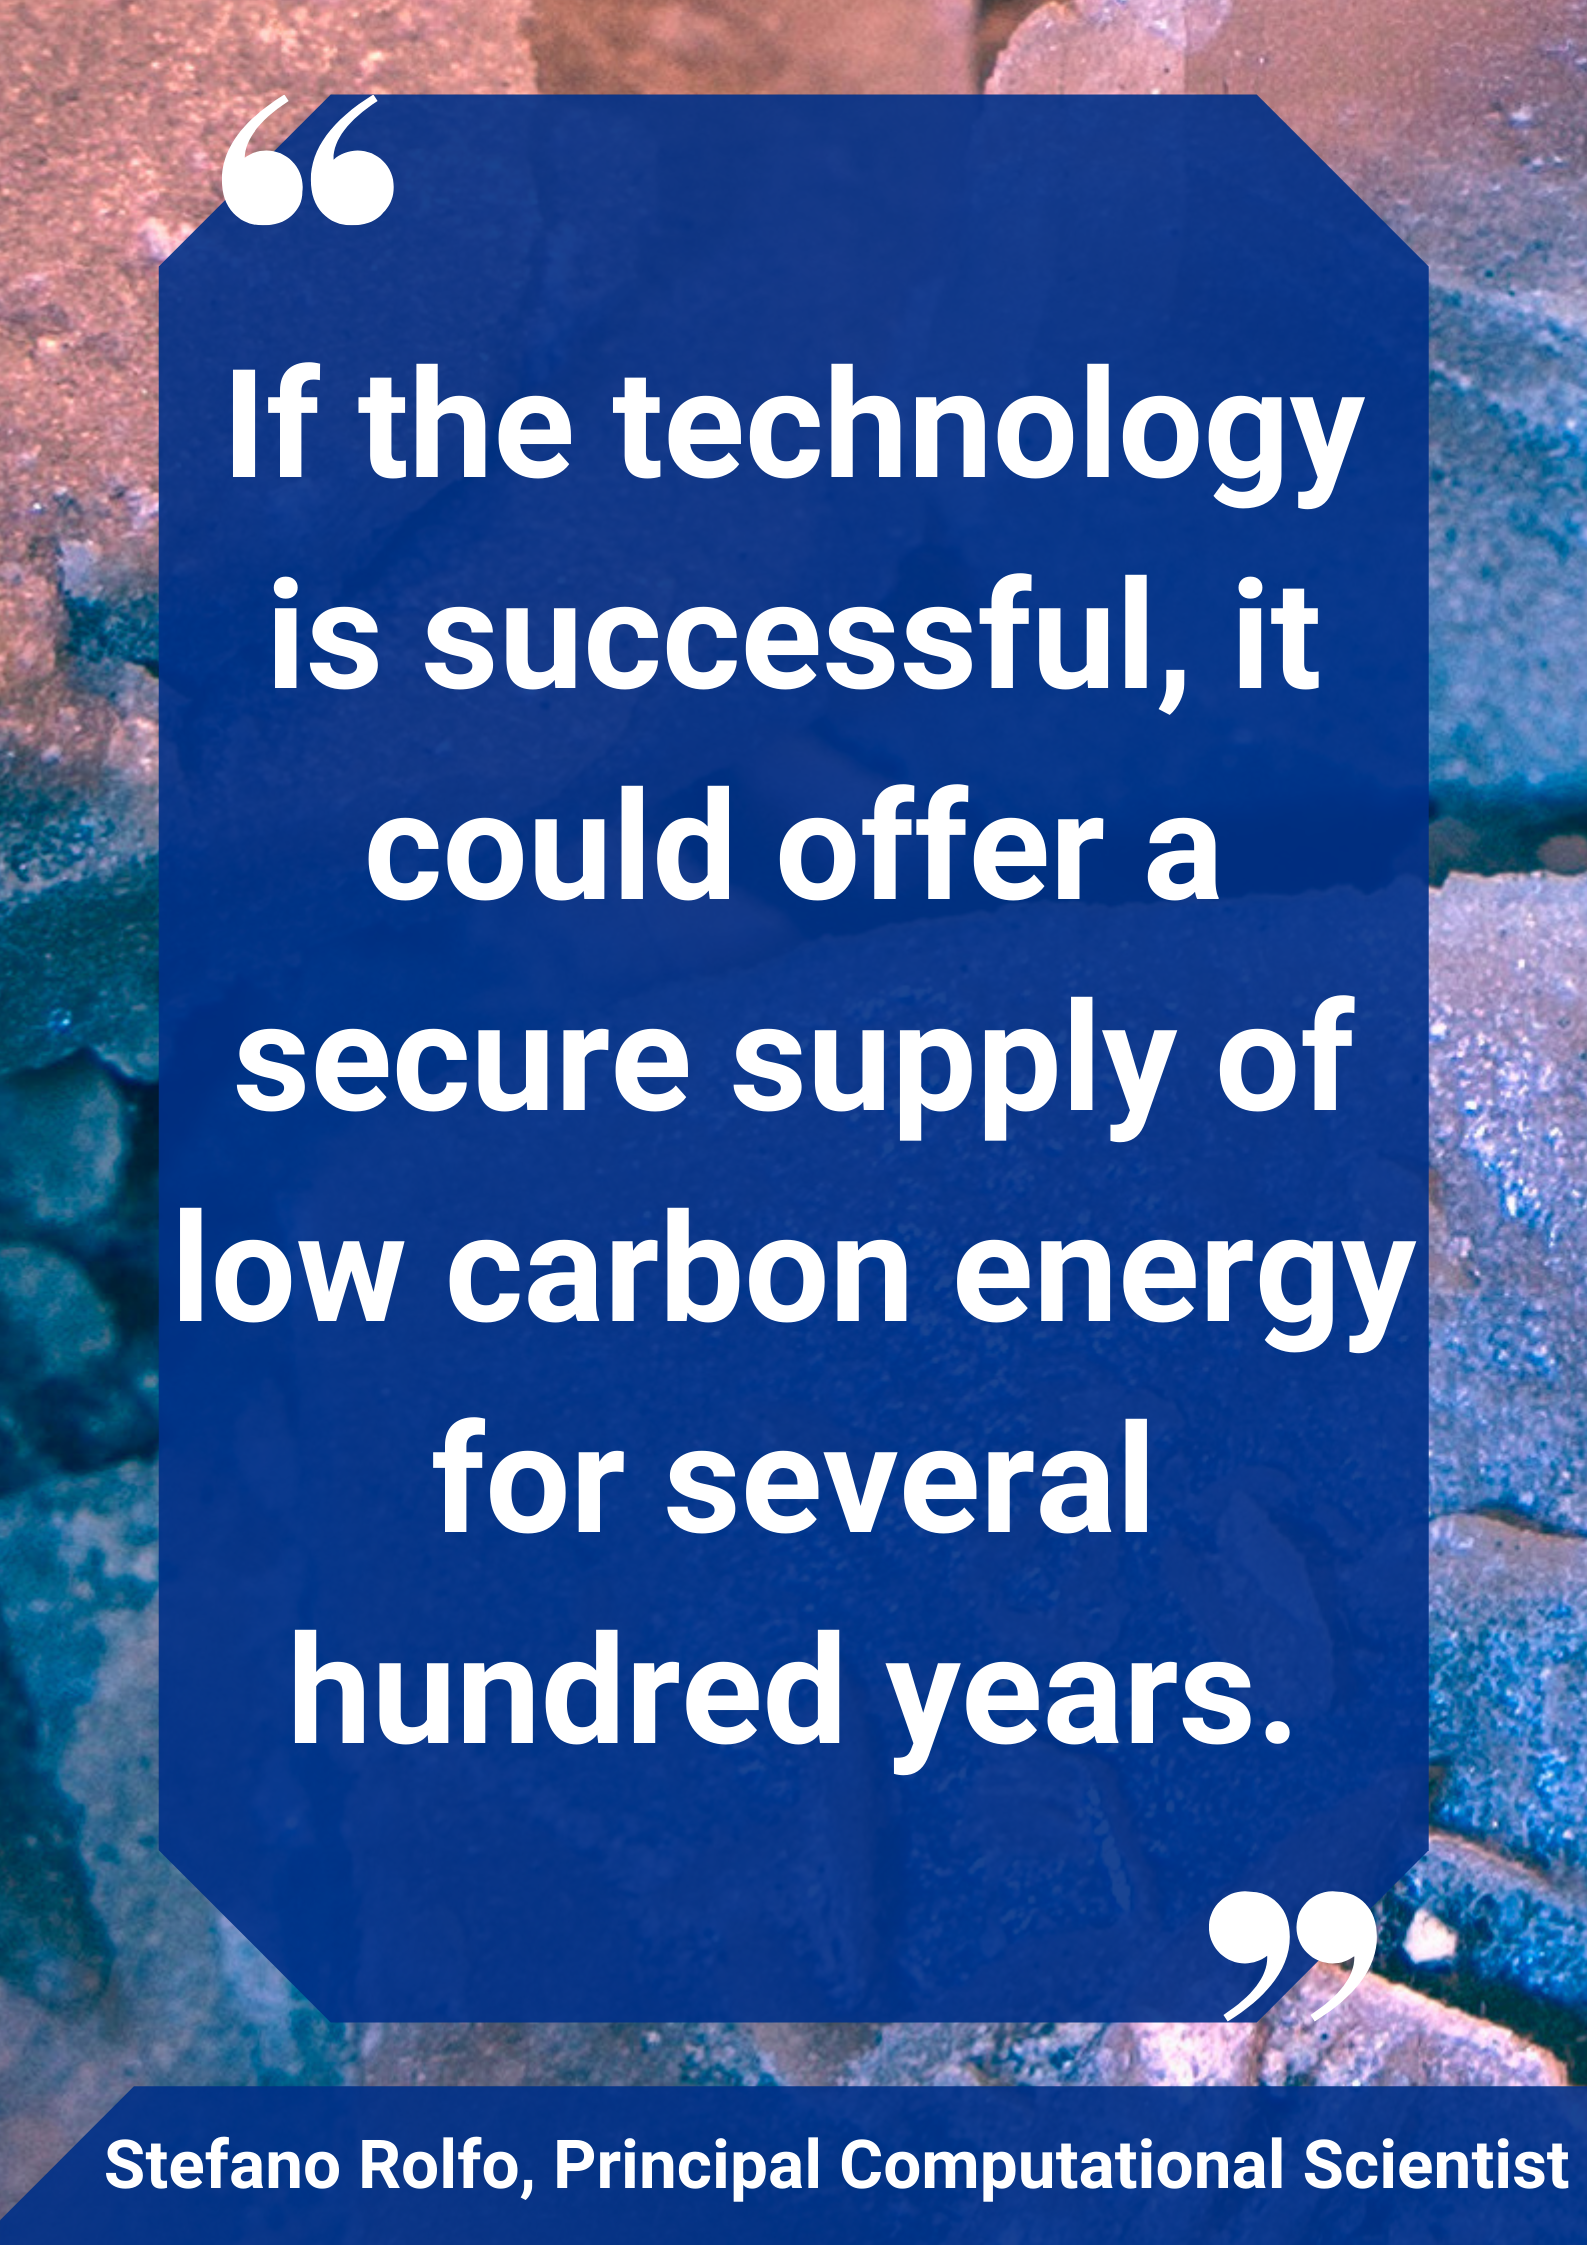 "If the technology is successful, it could offer a secure supply of low carbon energy for several hundred years."Stefano Rolfo